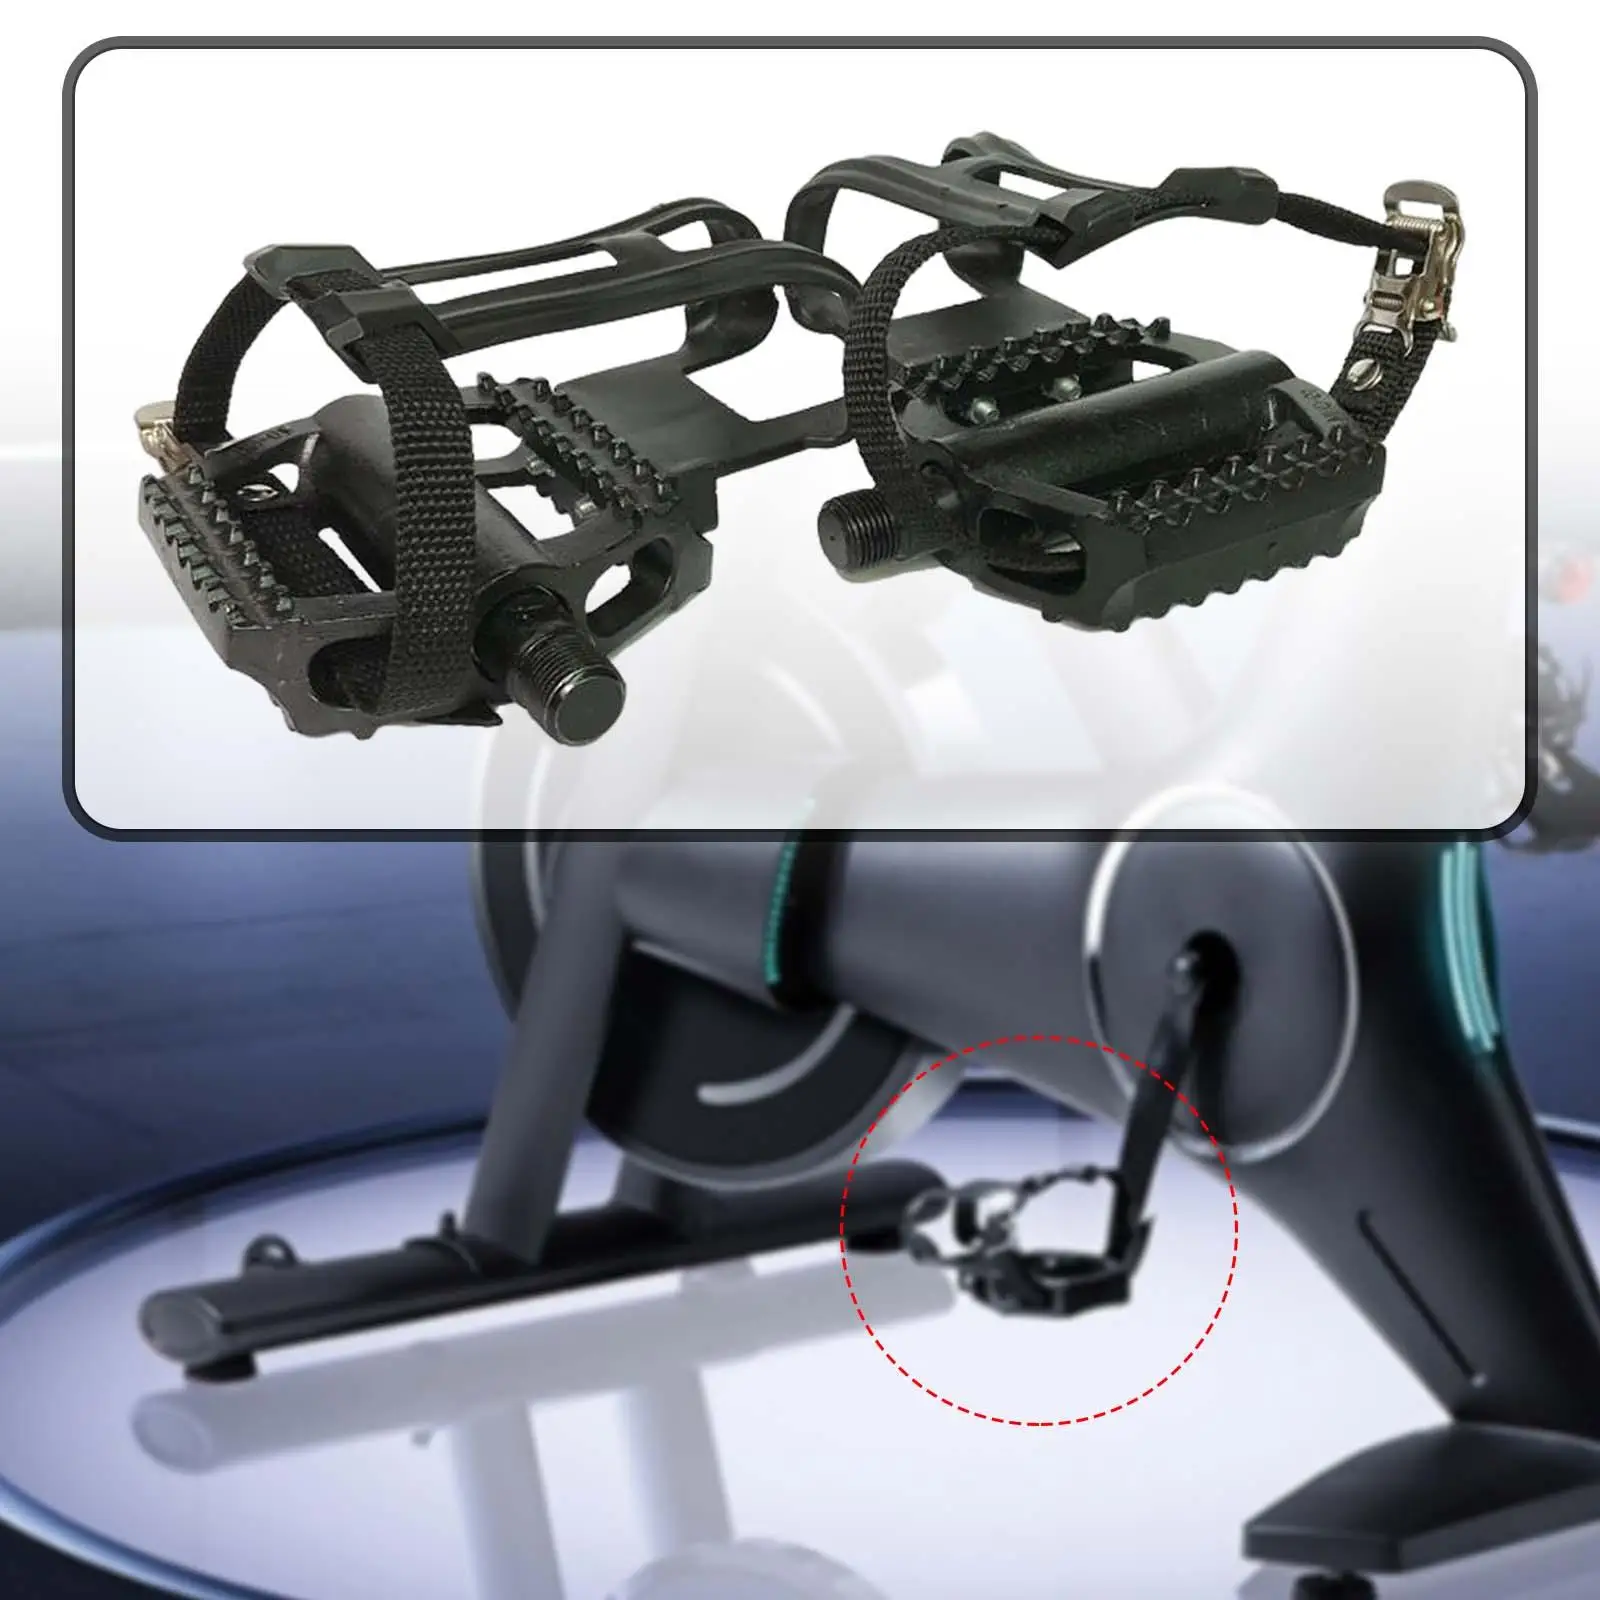 Exercise Bike Pedals 18mm Spindle W/ Adjustable Straps for Accessories Parts